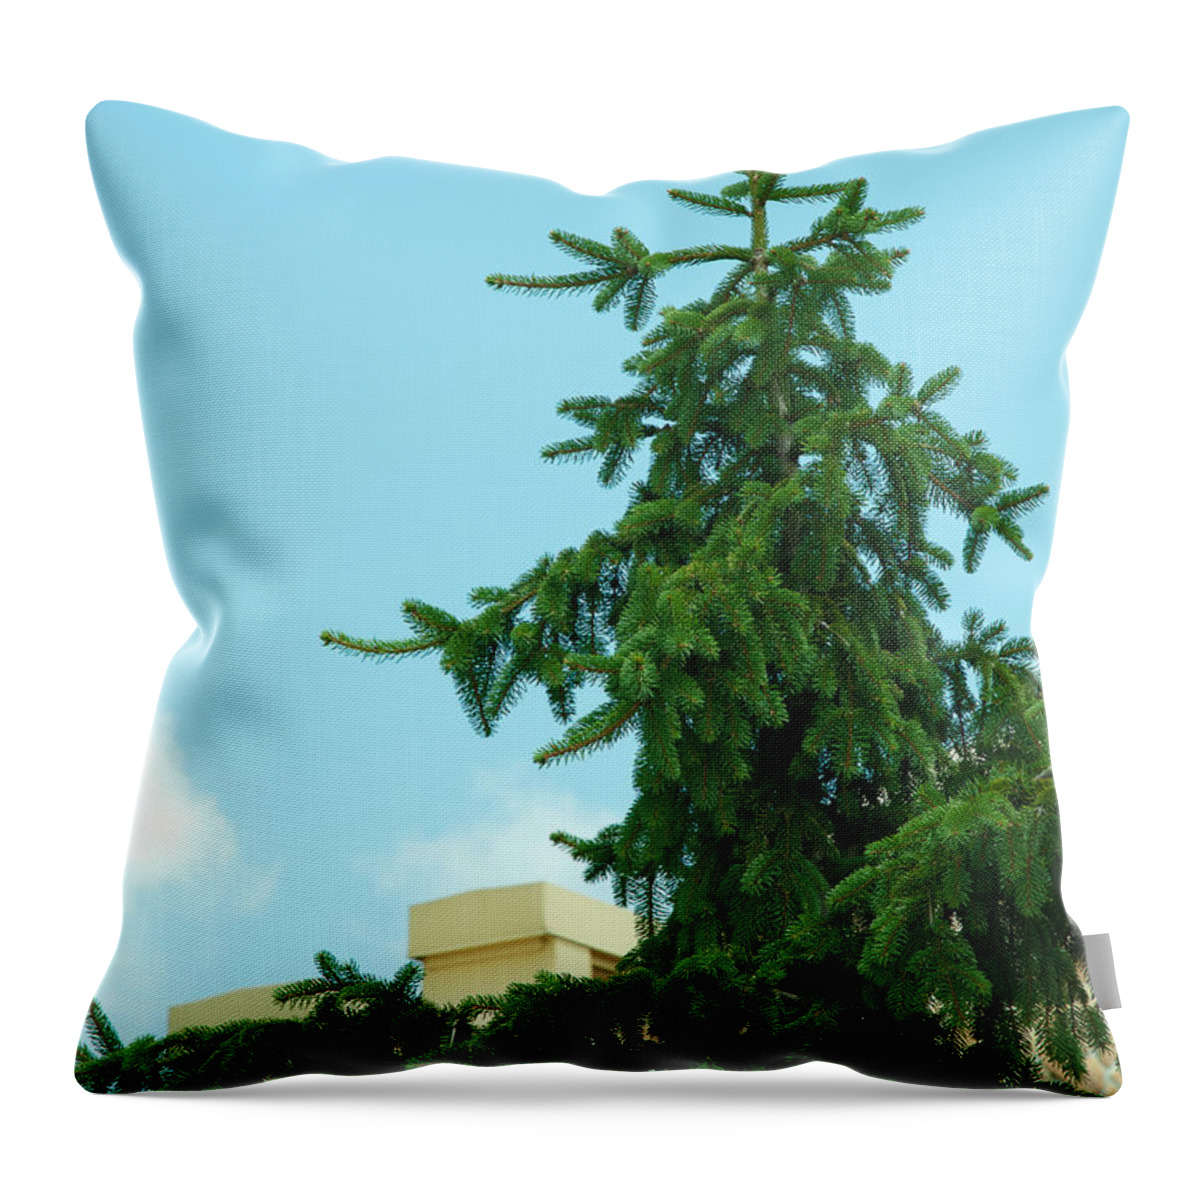 Evergreen Throw Pillow featuring the photograph One Cool Evergreen by Lena Wilhite